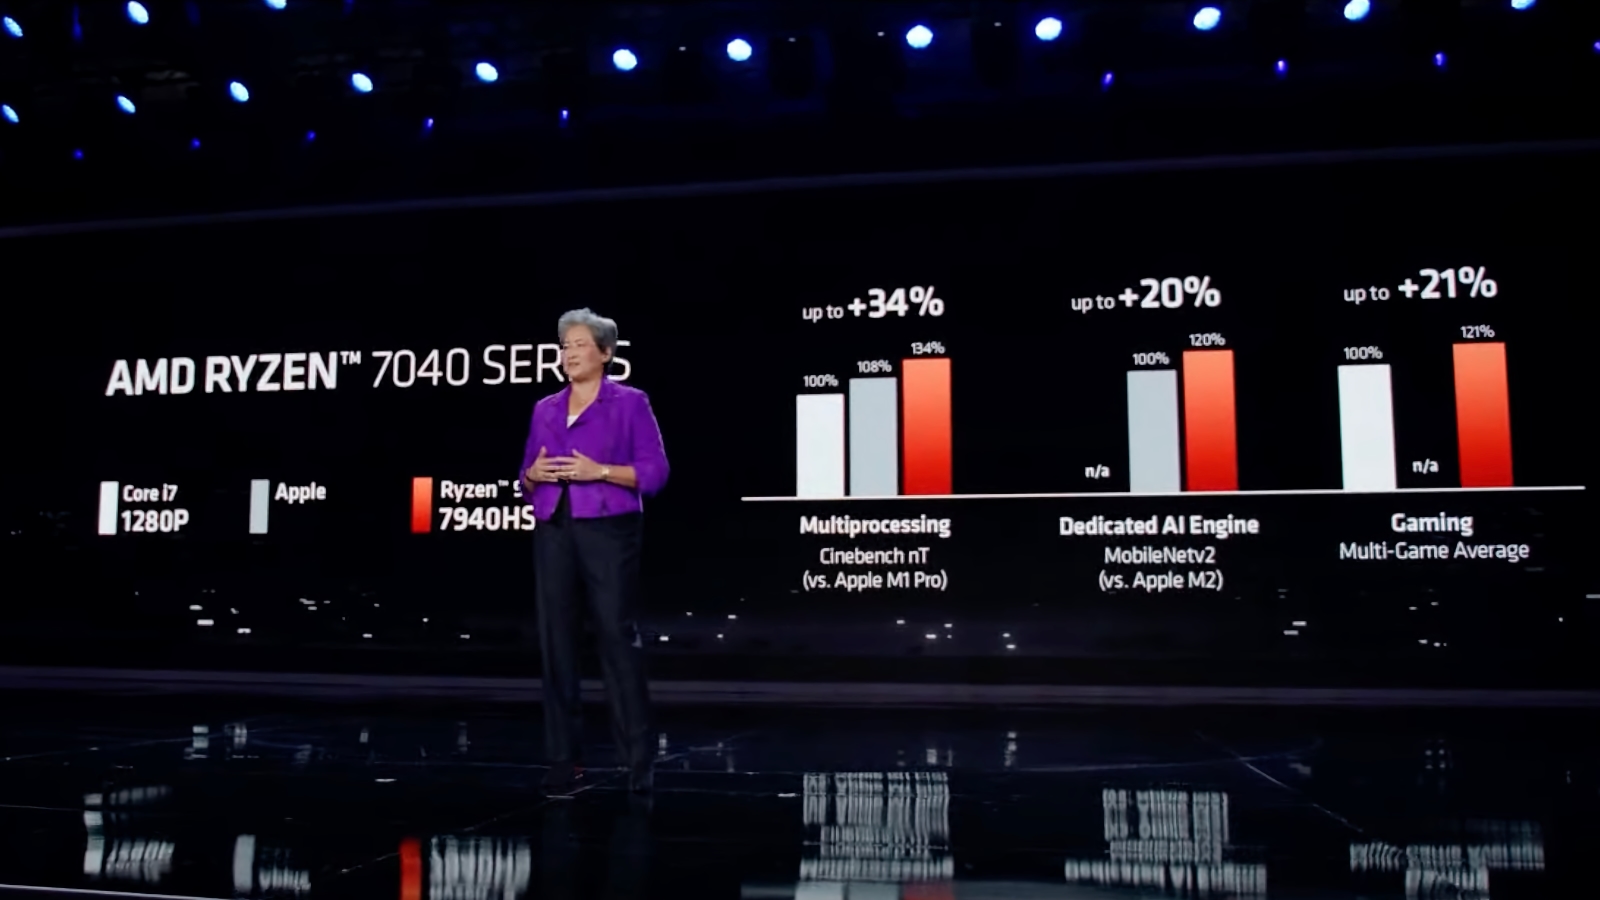 AMD wants everyone to know that its new chips are faster than Appleâs old chips